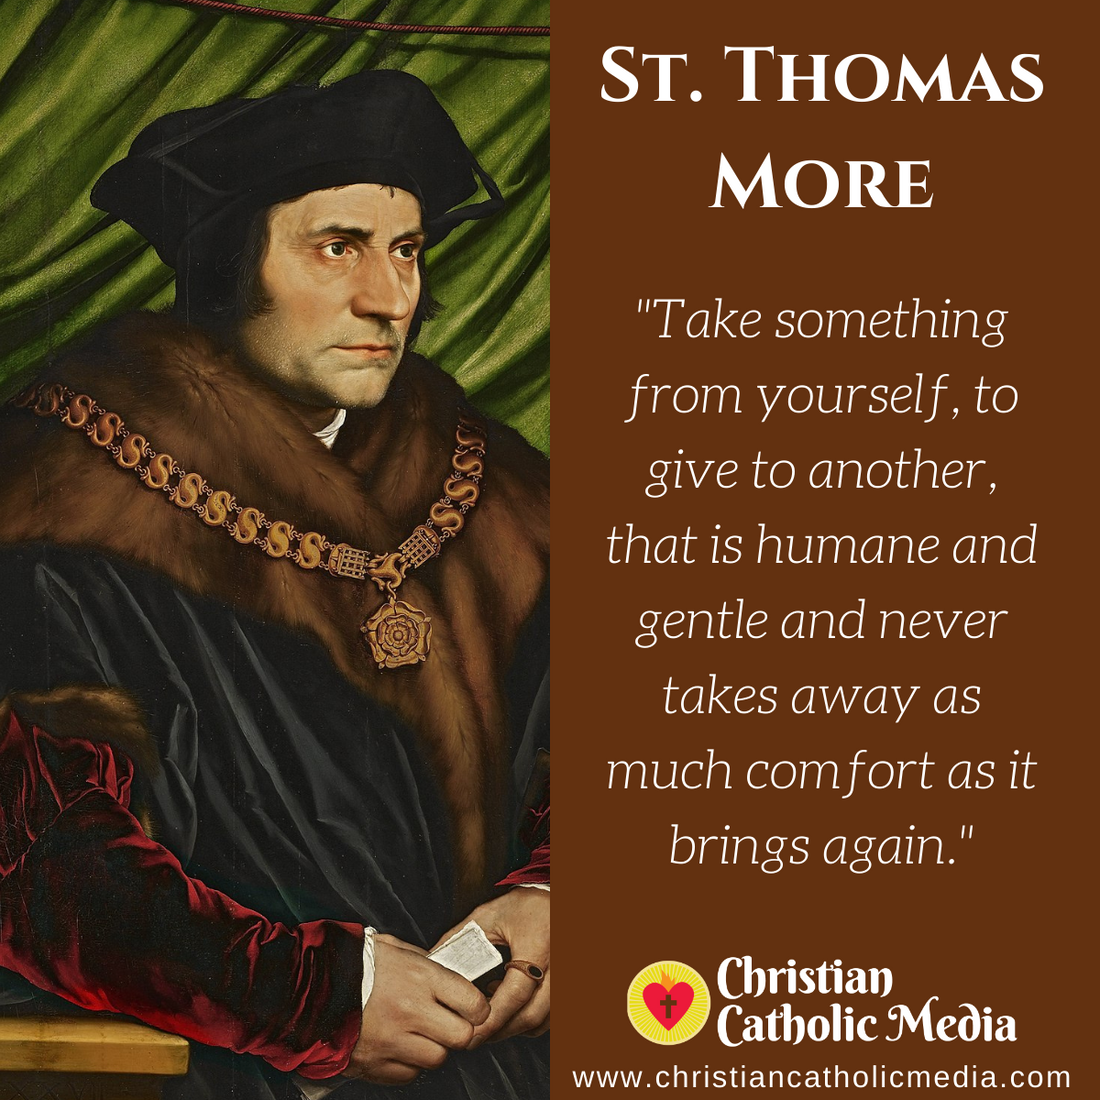 St. Thomas More - Tuesday June 22, 2021